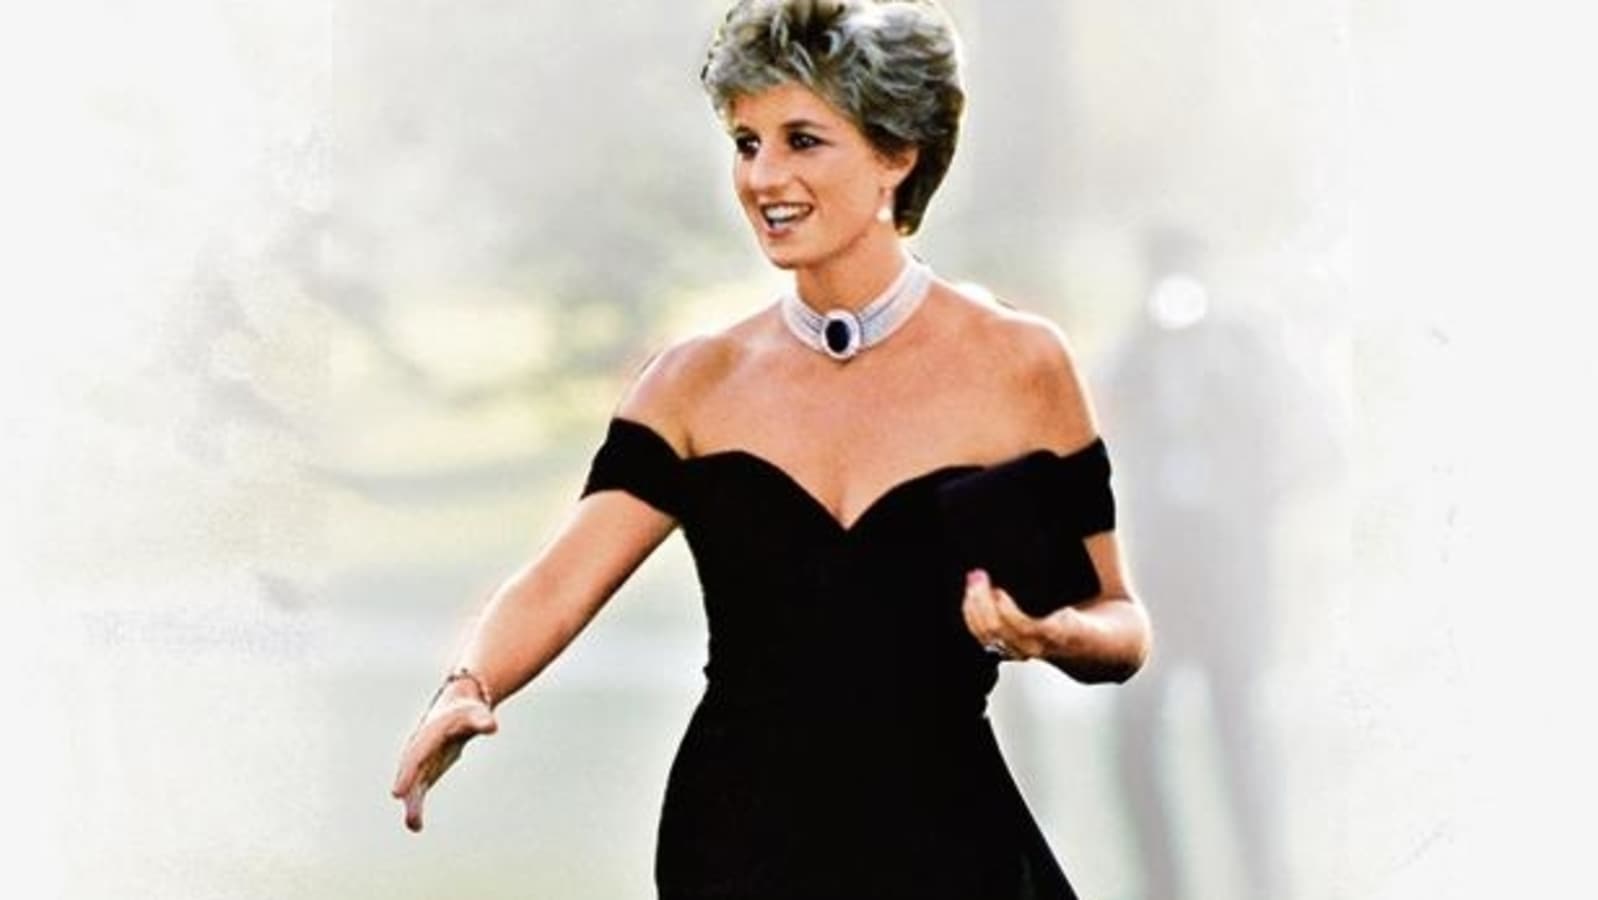 The Day Princess Diana And Her 'Revenge Dress' Shocked The World